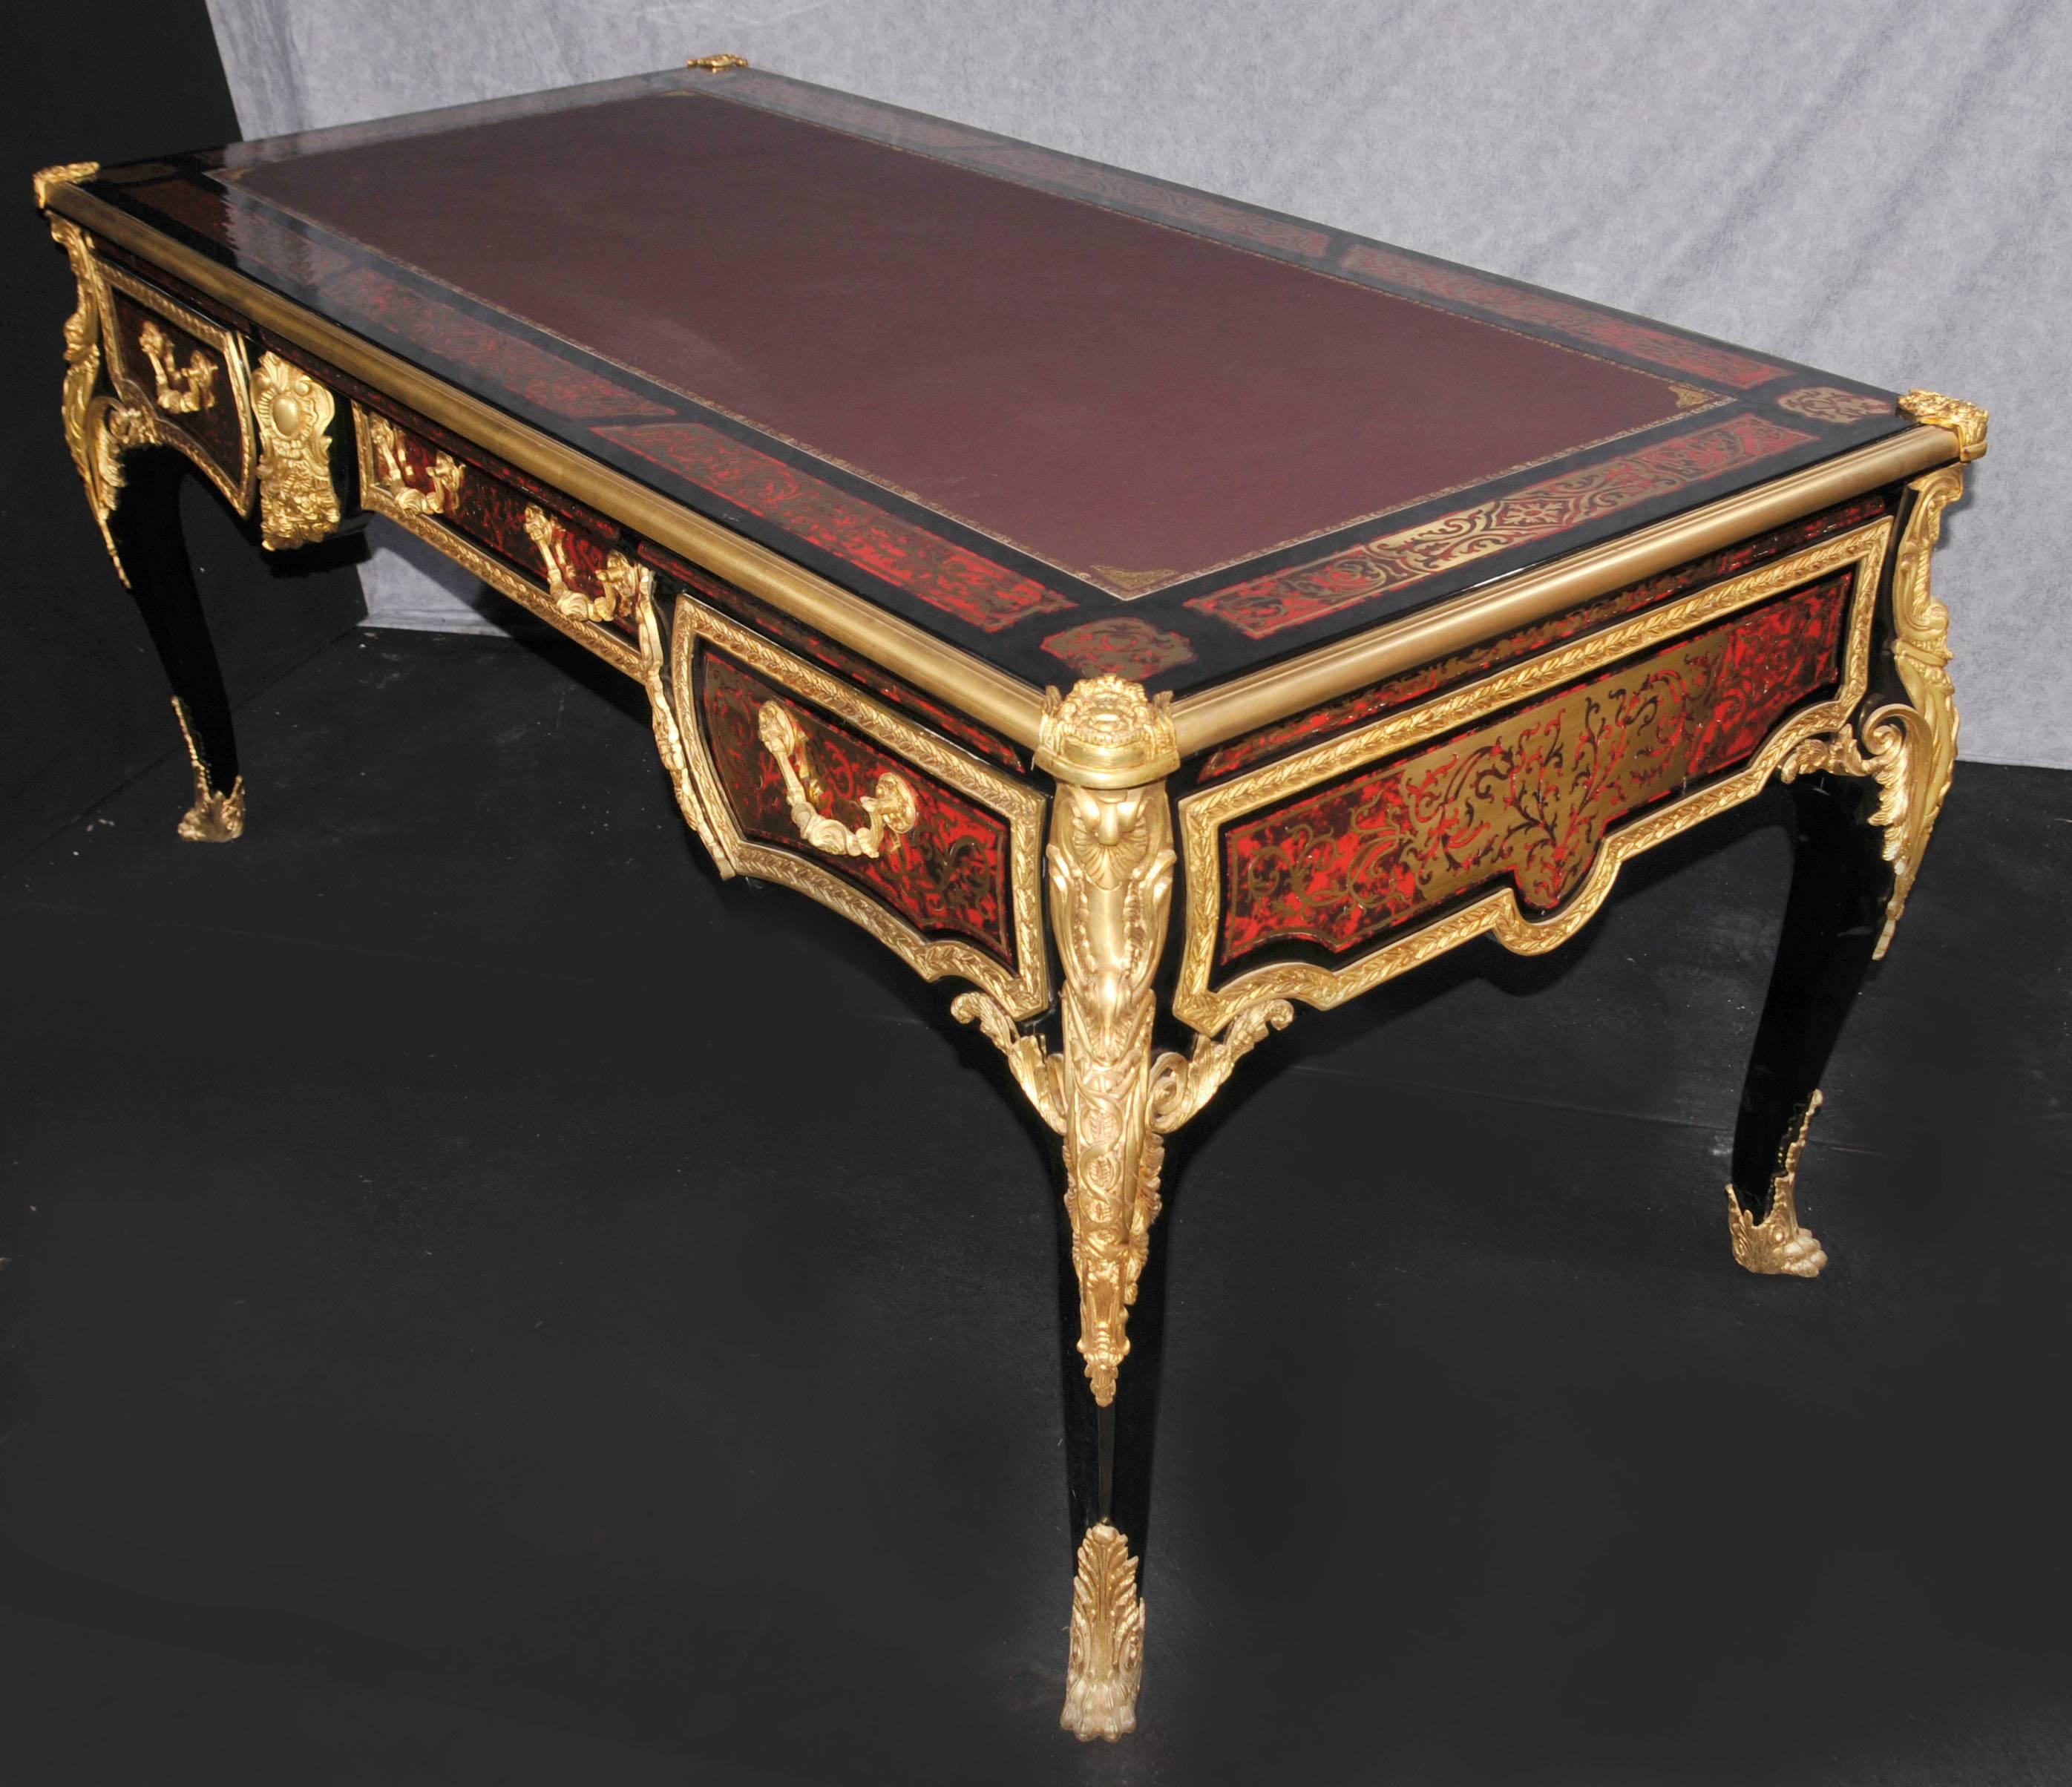 Absolutely stunning French Boulle style desk or bureau plat.
One of the things that attracted us to this desk was it's big size six feet wide.
Charles Andre Boulle was renowned for his trademark style of inlay using brass overlaid over the ebony